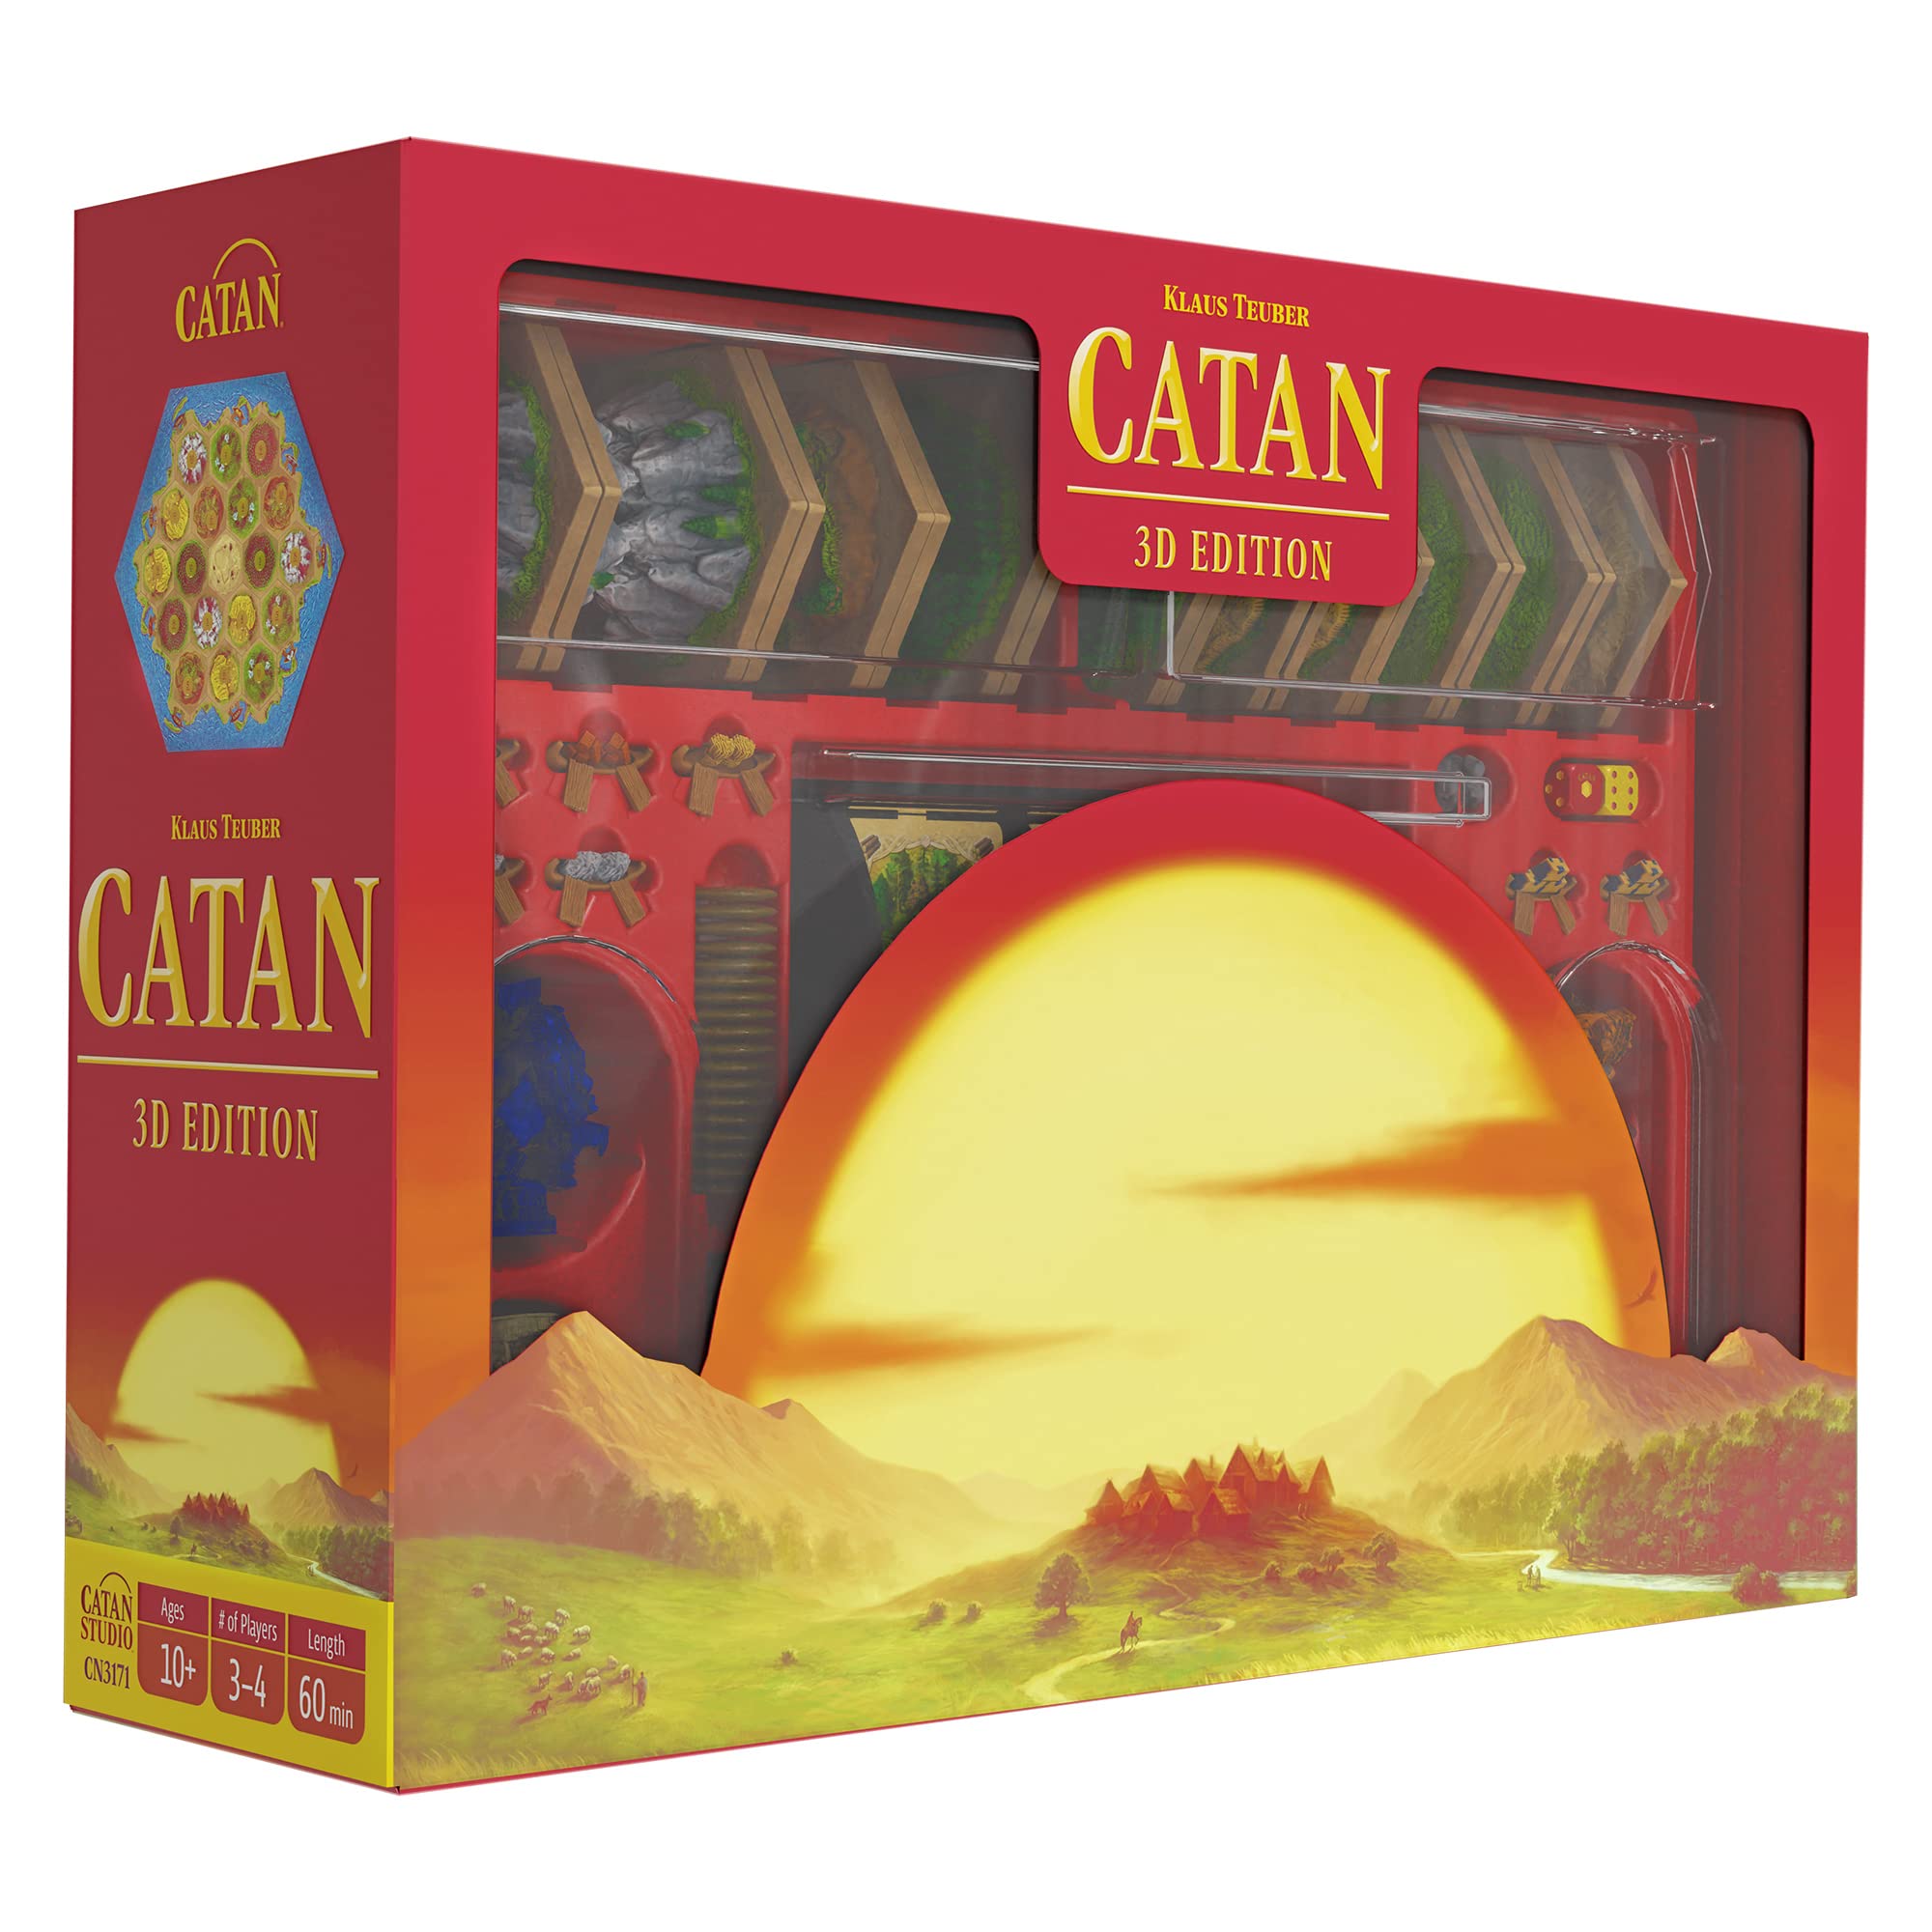 CATAN 3D EDITION Board Strategy Game with Immersive 3D ...